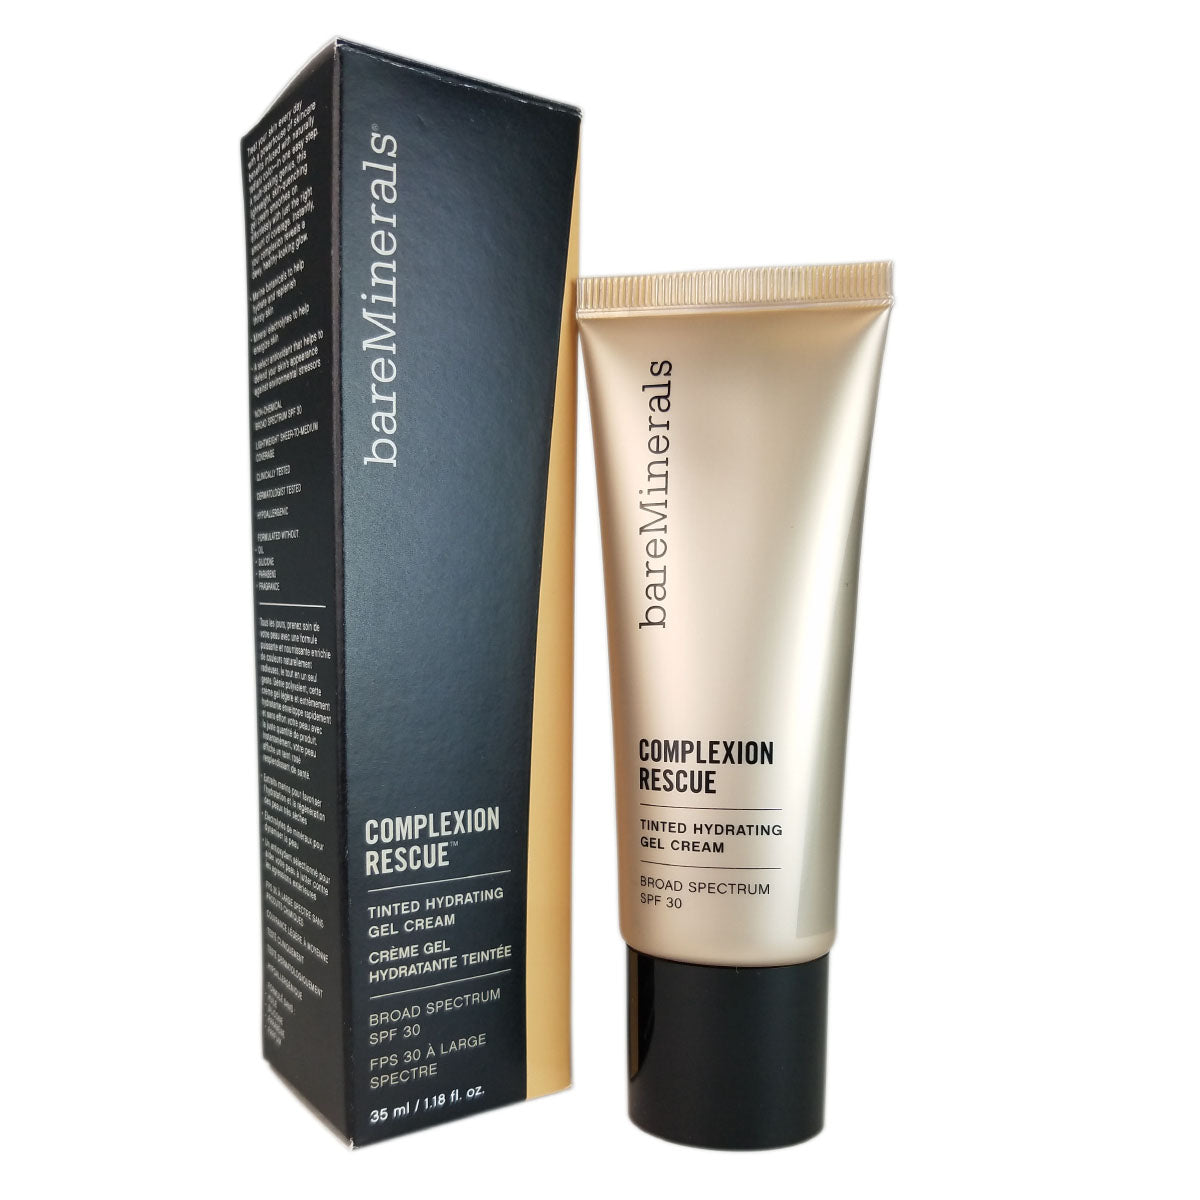 BareMinerals Complexion Rescue Tinted Hydrating Gel Cream Natural # 05 - 1.18 oz